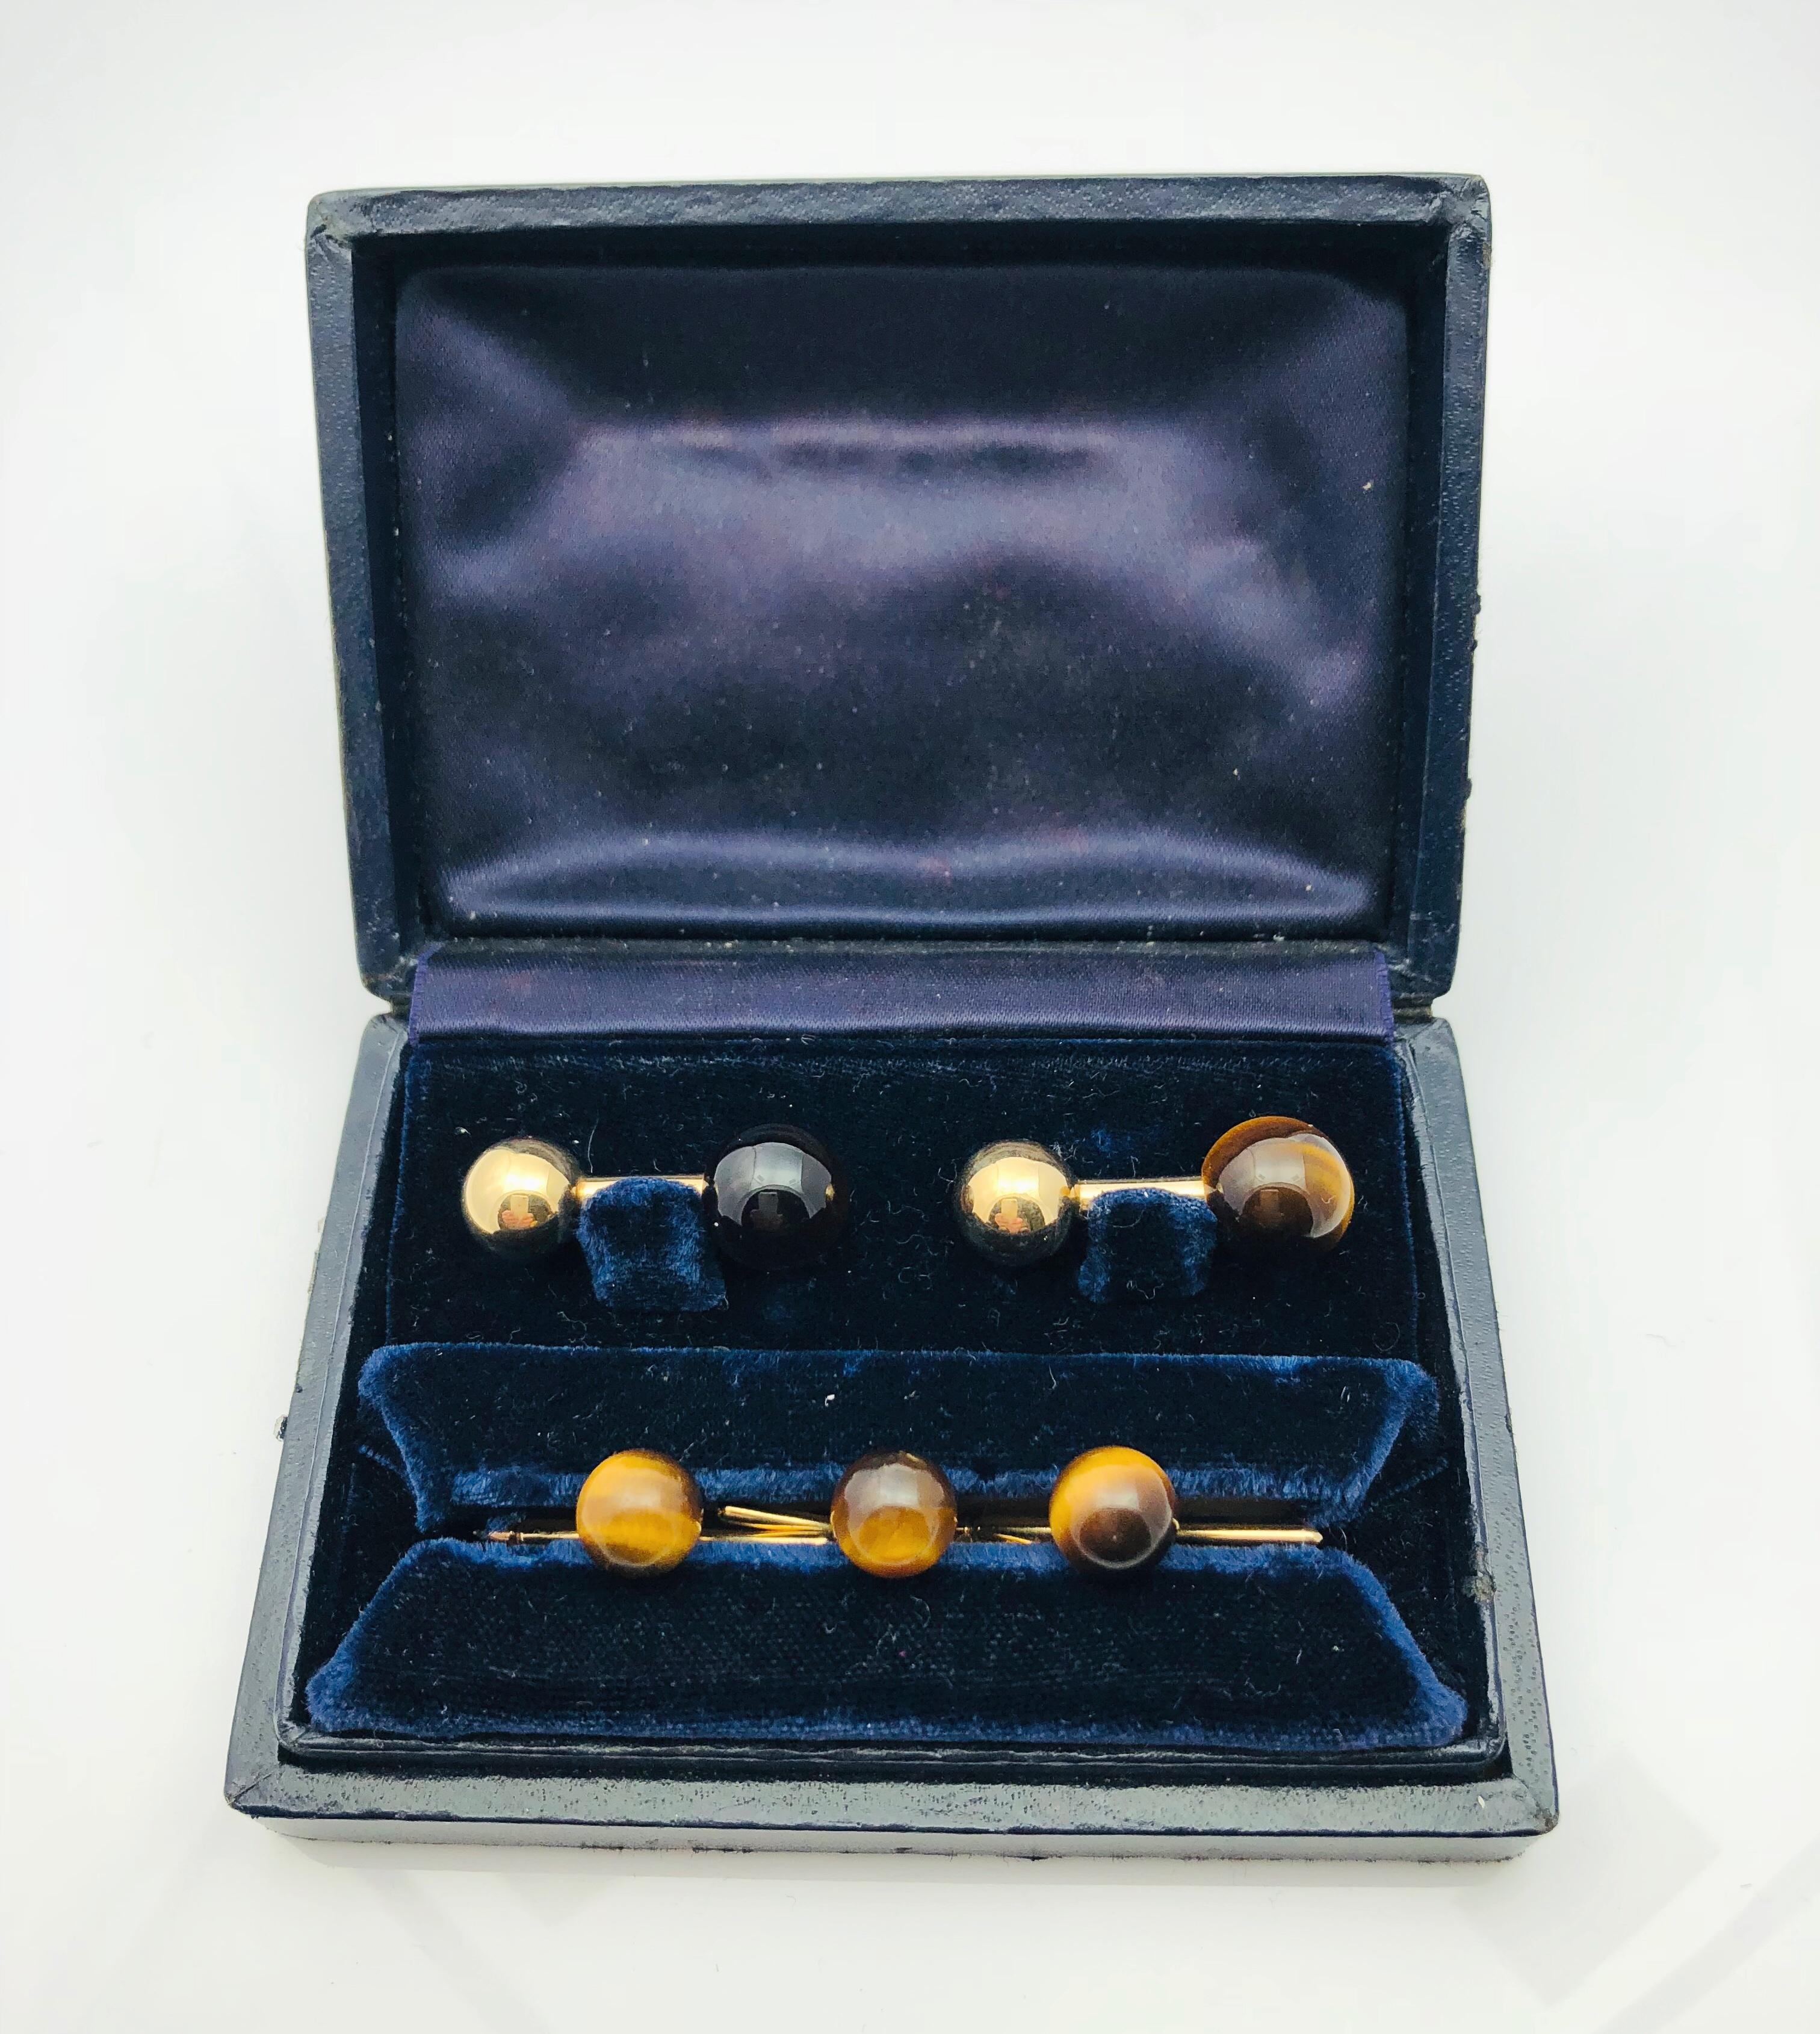 Gorgeous Tiffany & Co. 14k yellow Gold and Tiger's Eye Cufflink and Stud Tuxedo set in original Box. The Cufflinks are one inch long and each have a 10mm yellow gold ball on one end and a 12 mm tiger's eye on the other end. They are stamped Tiffany